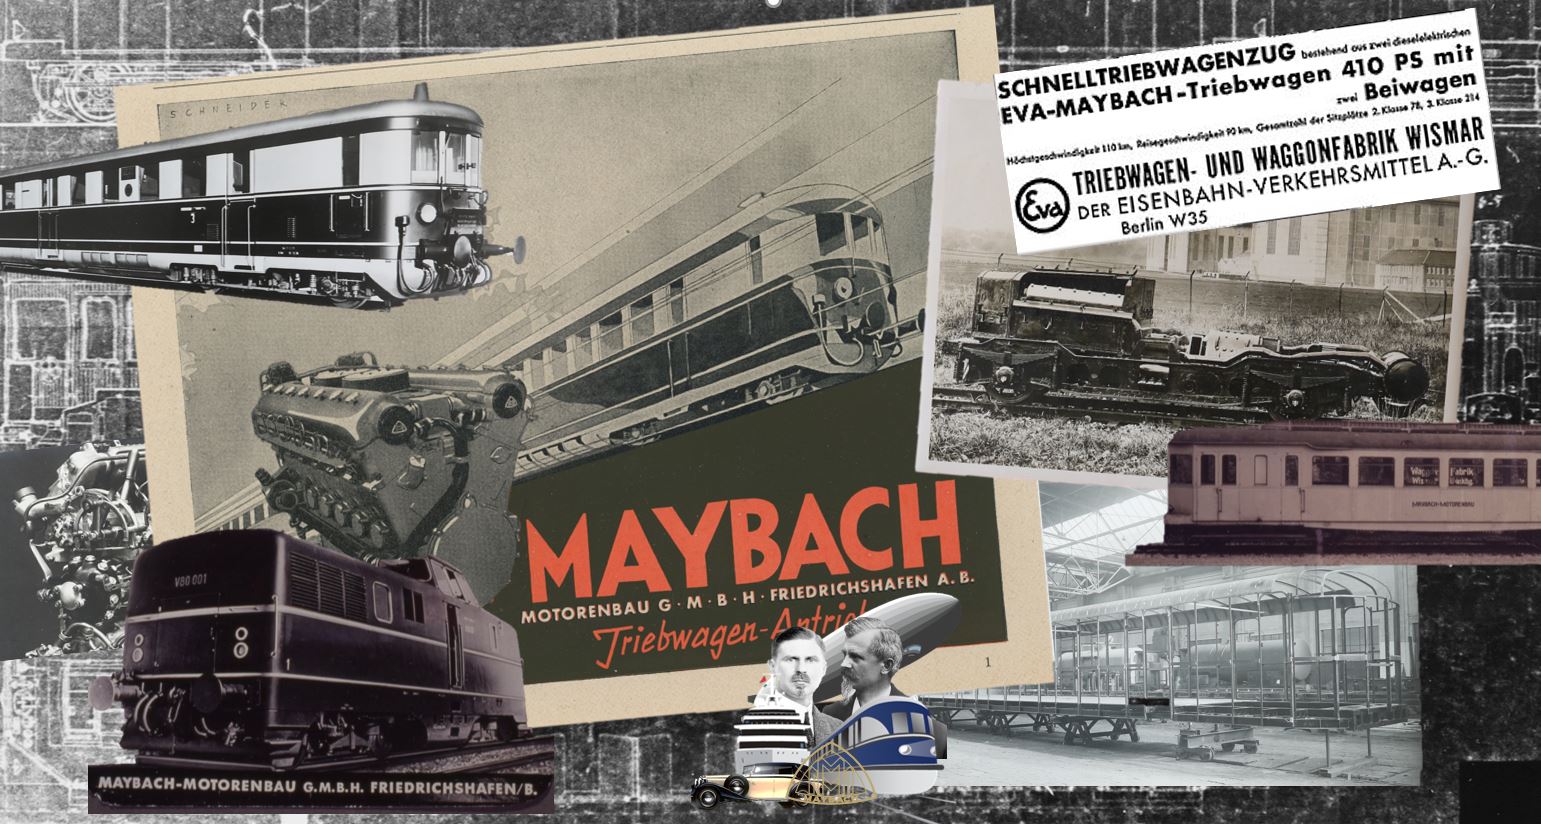 From the Maybach Archives: A new Ad(dition) to our growing Collection - The Wilhelm & Karl Maybach Foundation